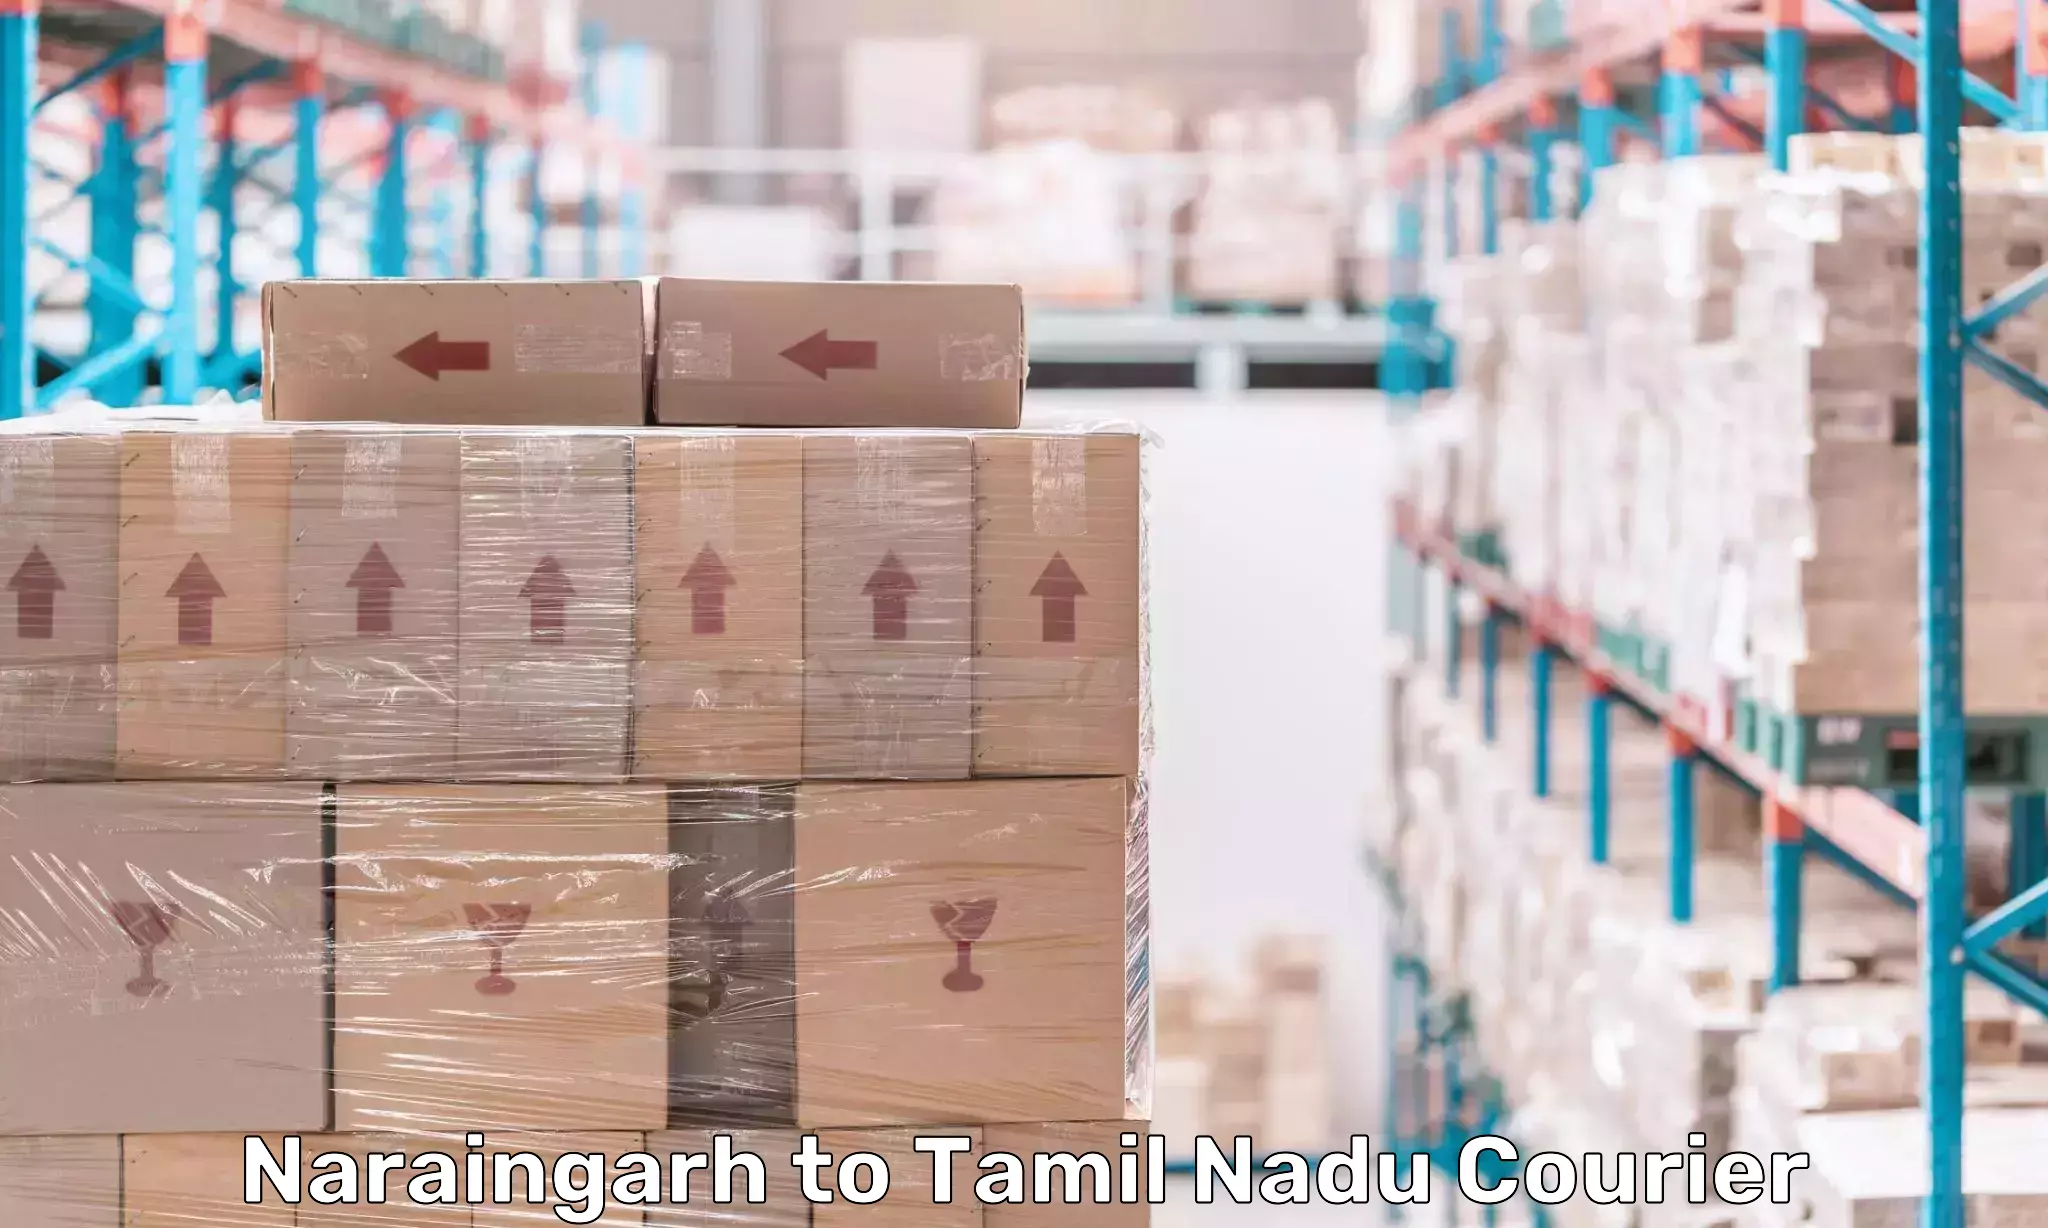 State-of-the-art courier technology Naraingarh to Anthiyur